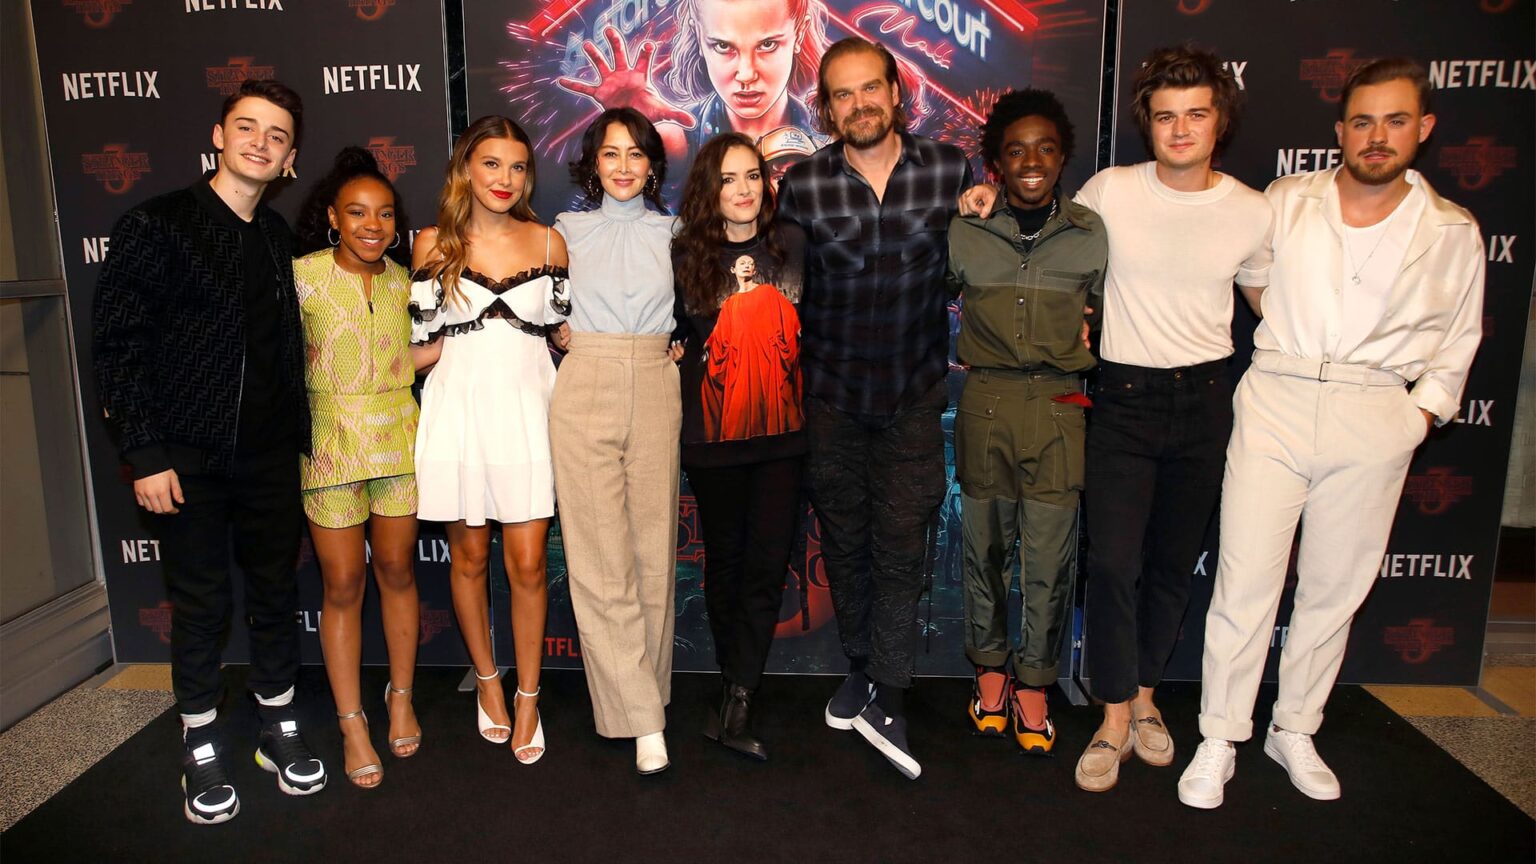 'Stranger Things' is coming back with season 4, but it looks like we're not in Hawkins anymore. Here's all the gossip you need to know, the cast included.